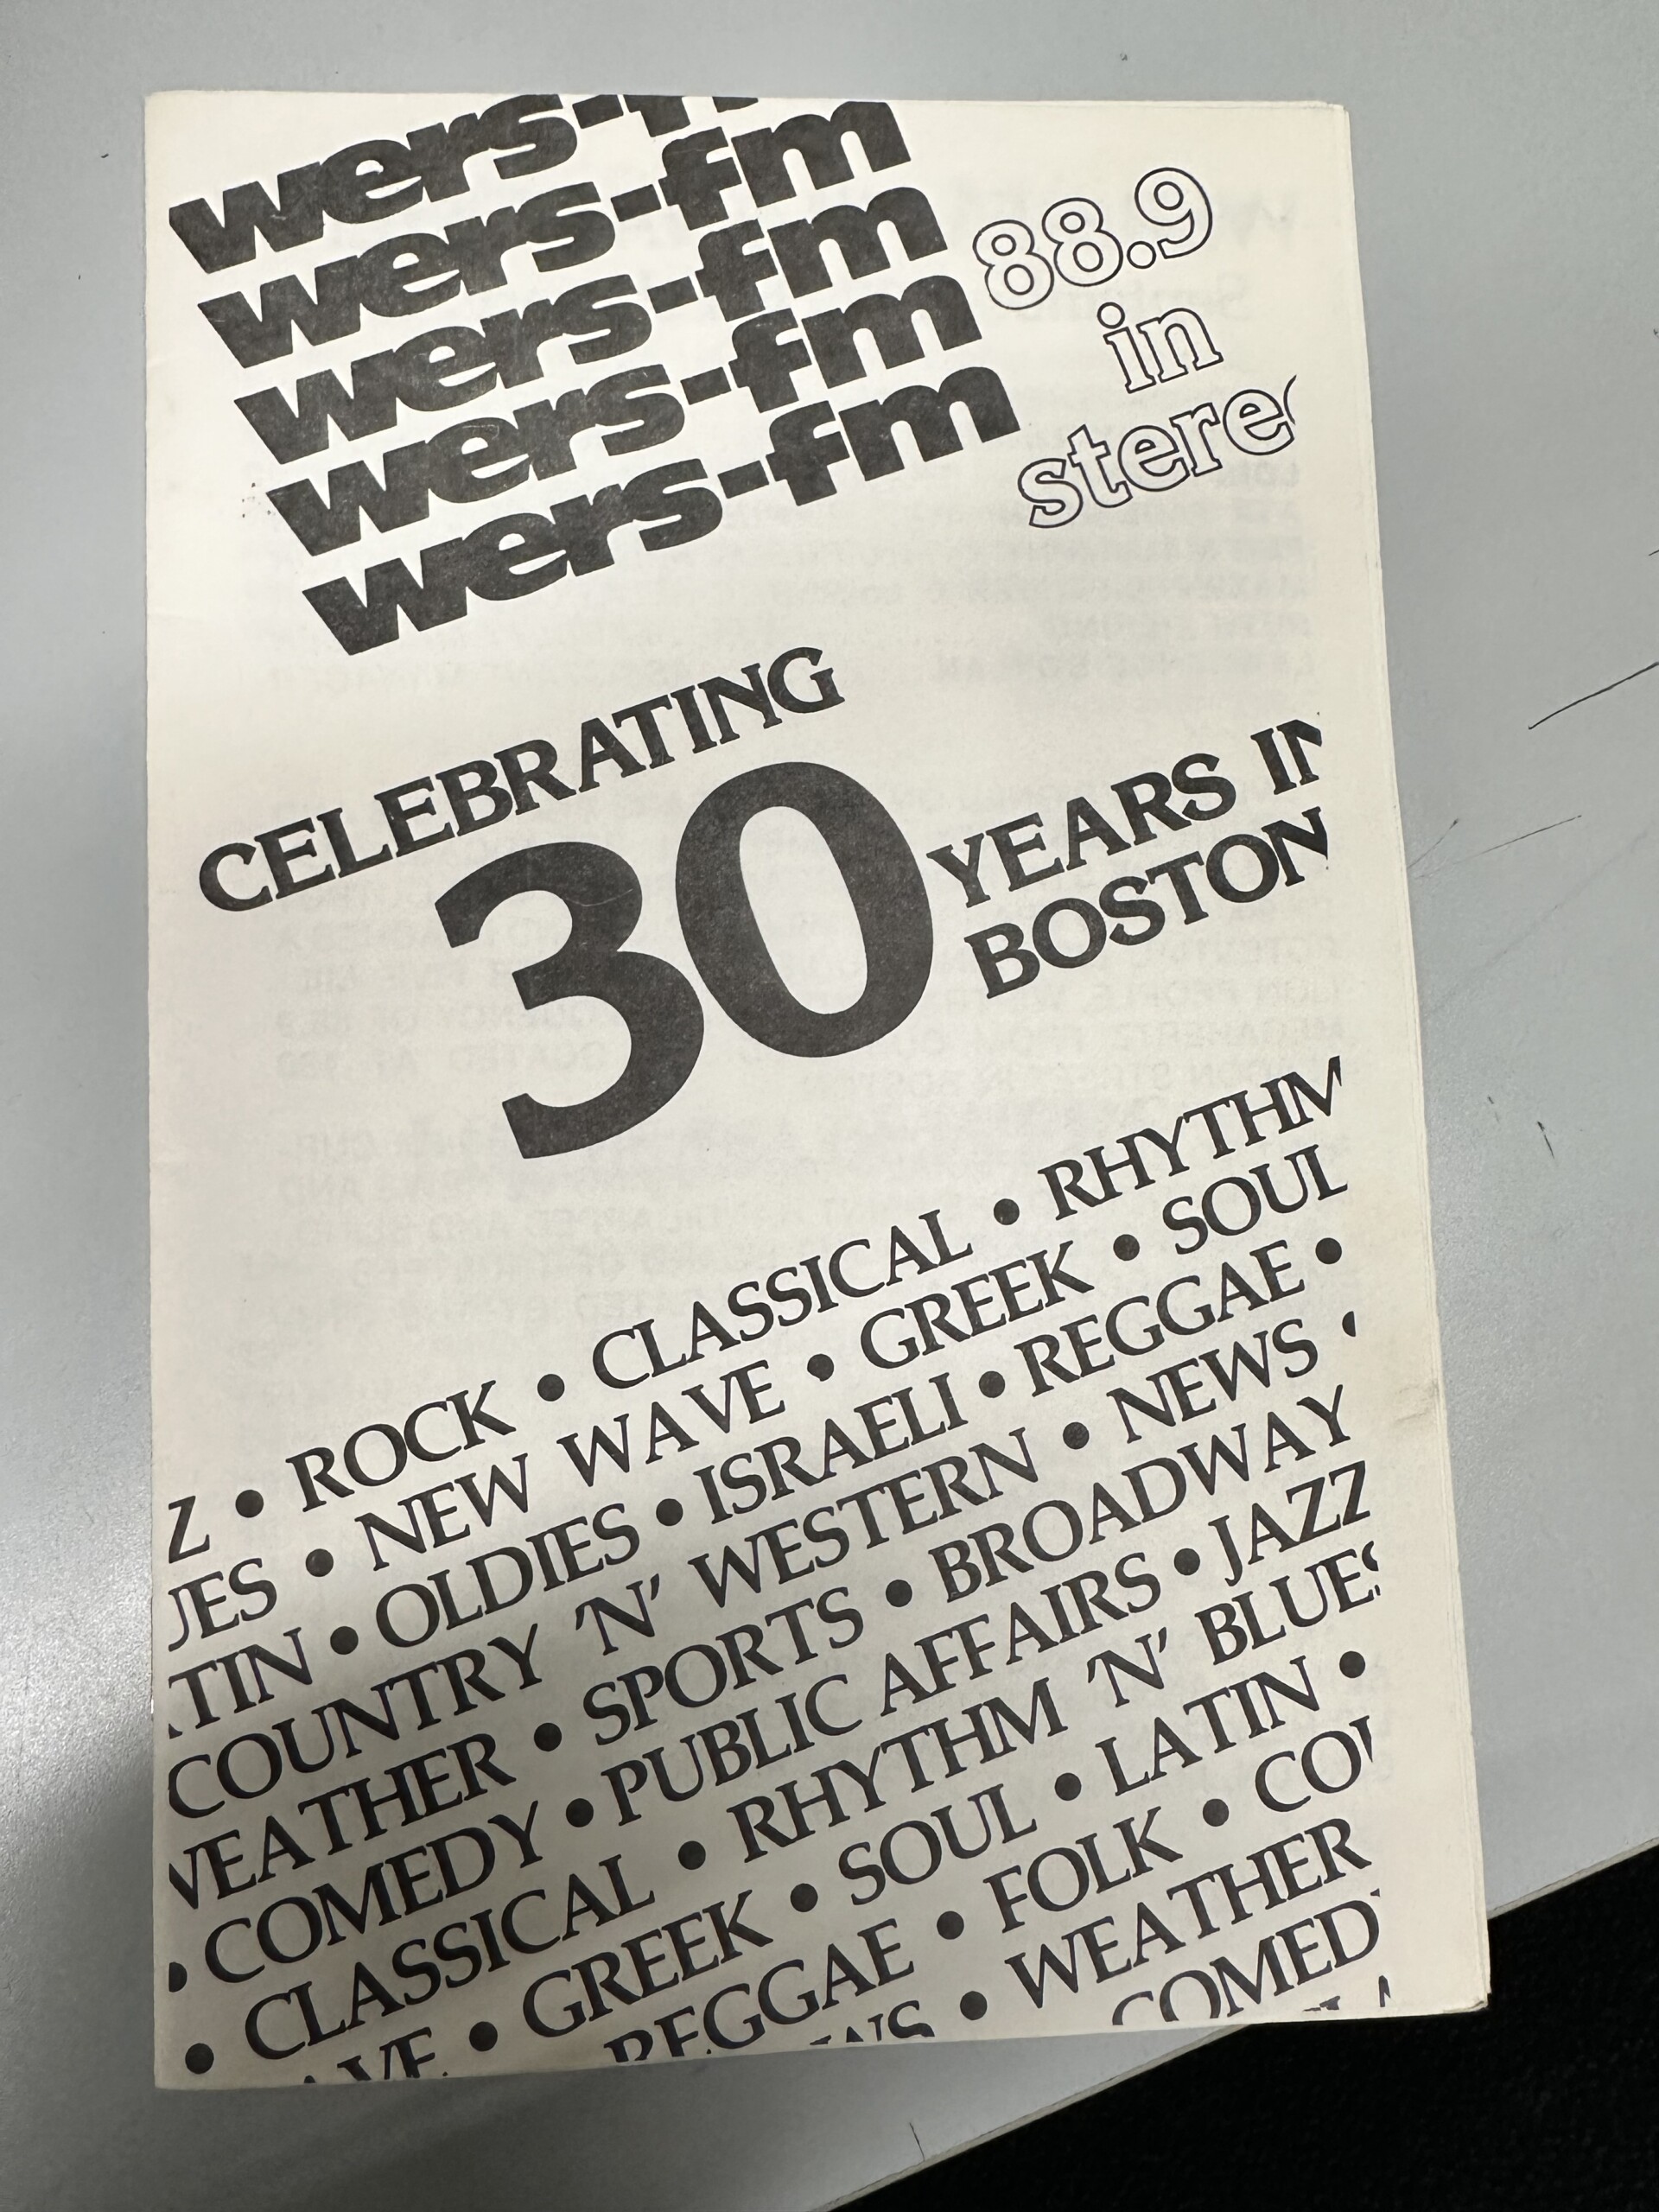 A WERS flyer from 1979 when the station was celebrating 30 years.